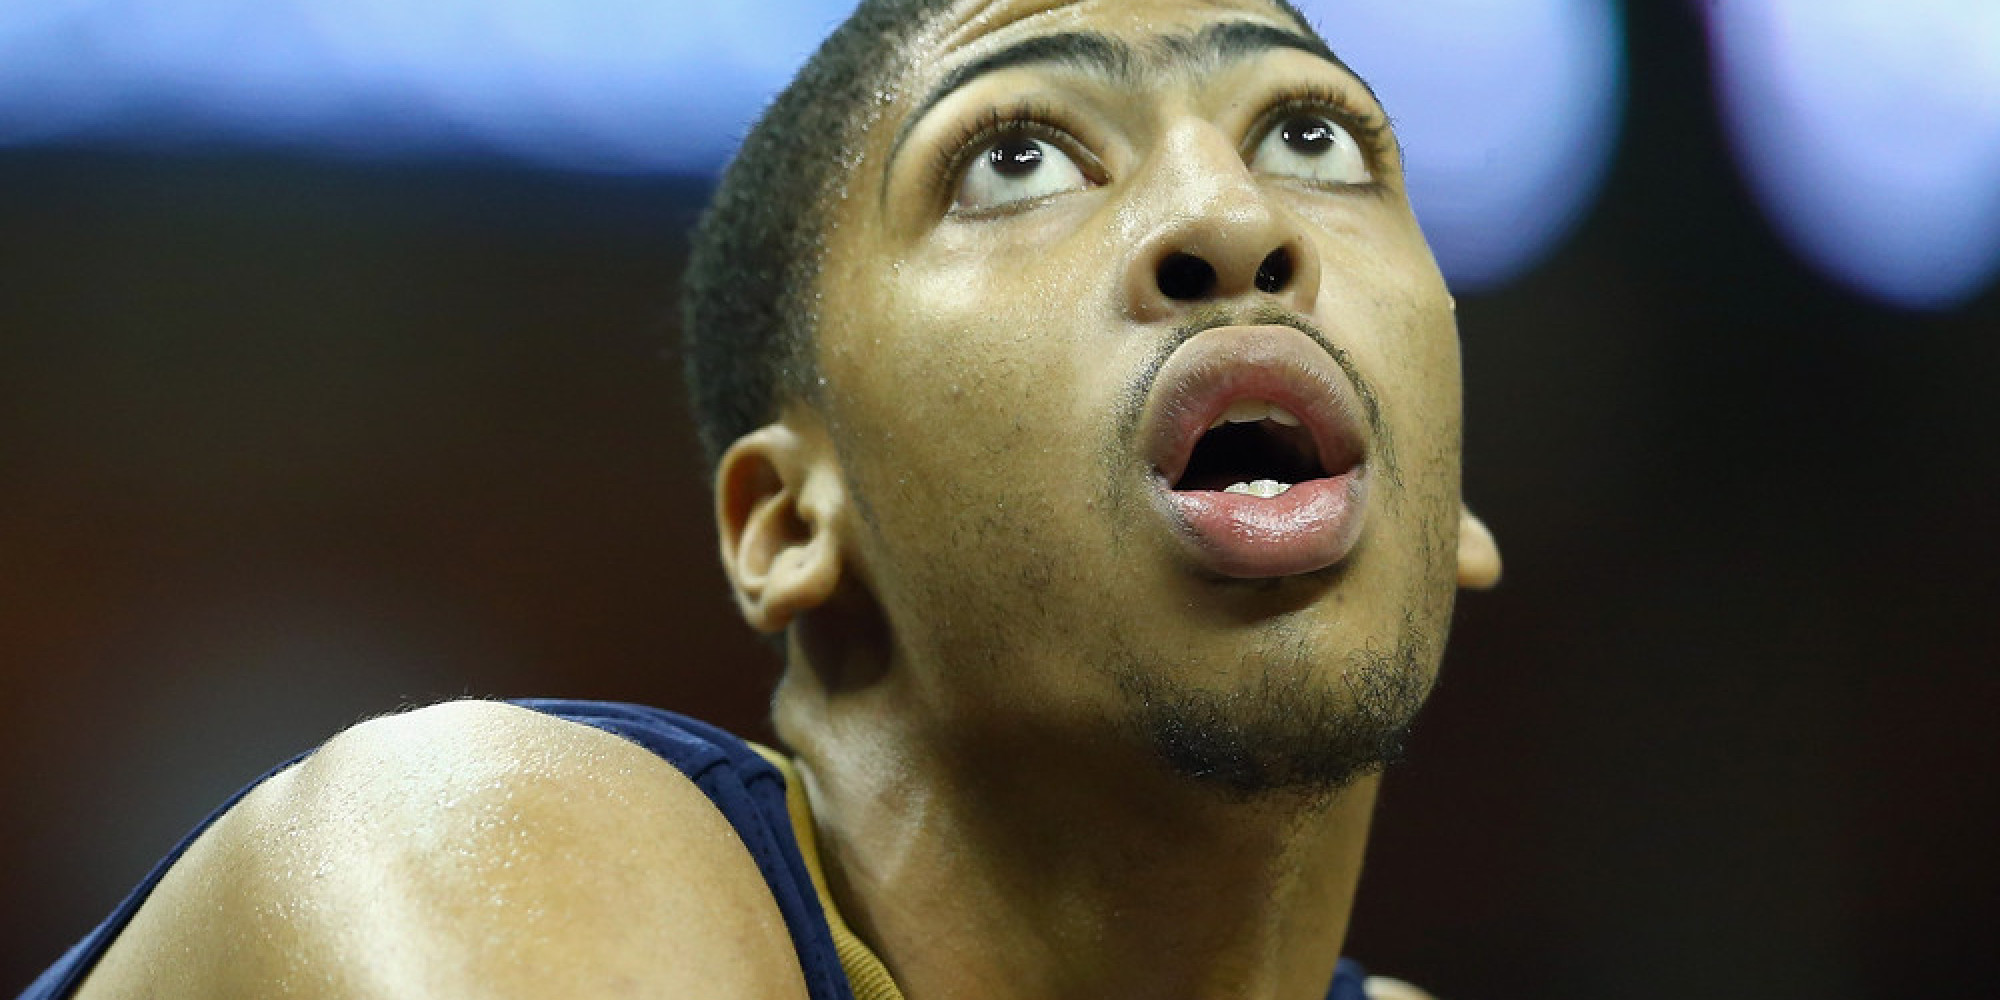 Video seems to show basketball star Anthony Davis nude and 